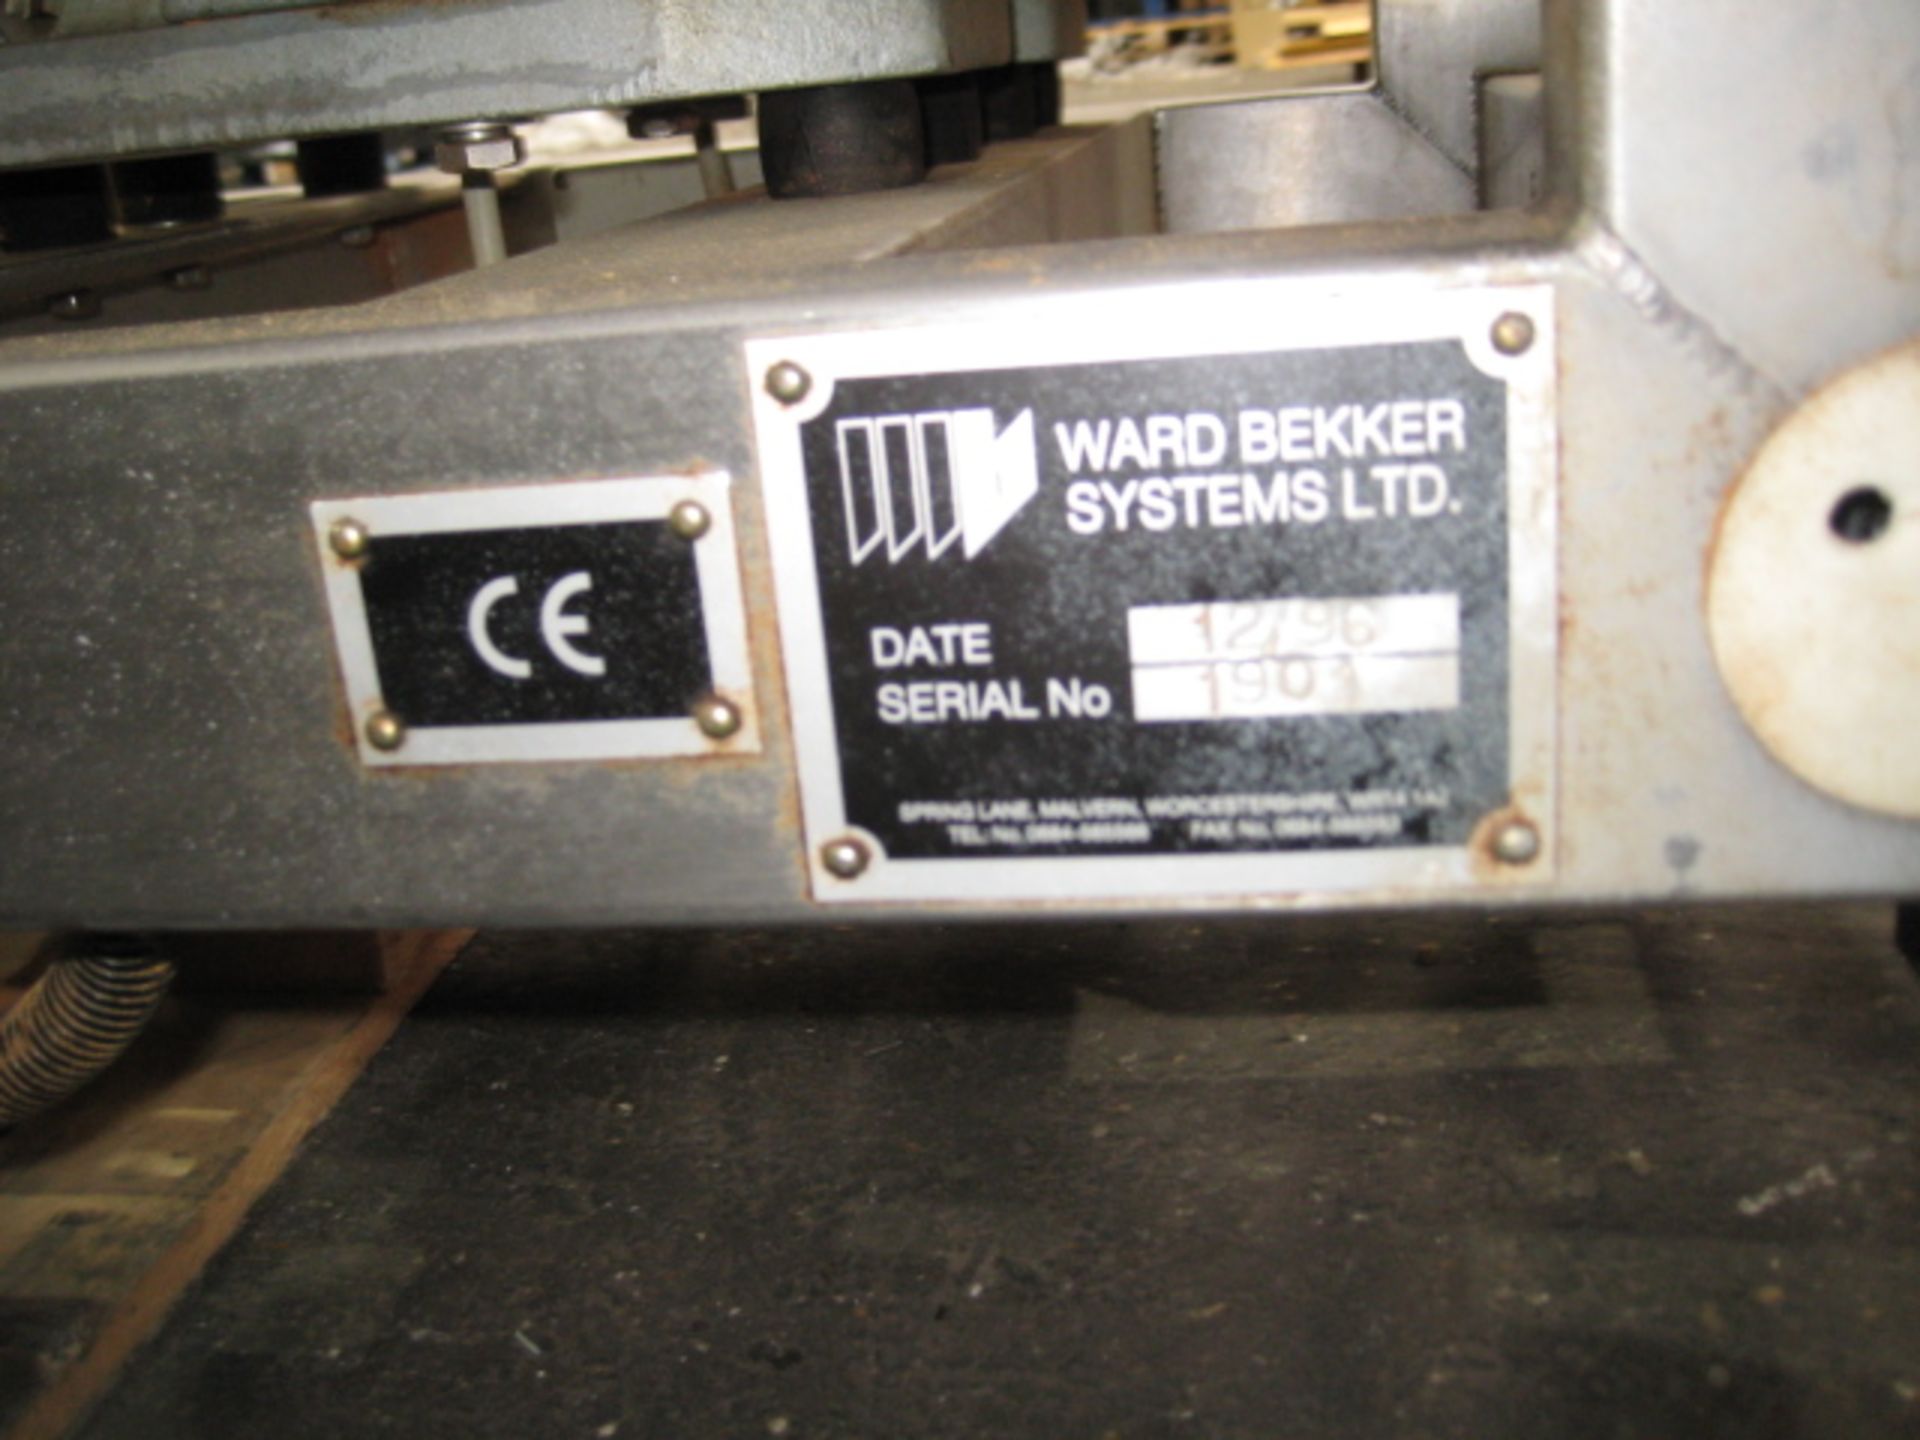 Weigher - Ward Bekker Digiway single channel linear weigher in stainless steel with control box. - Image 8 of 10